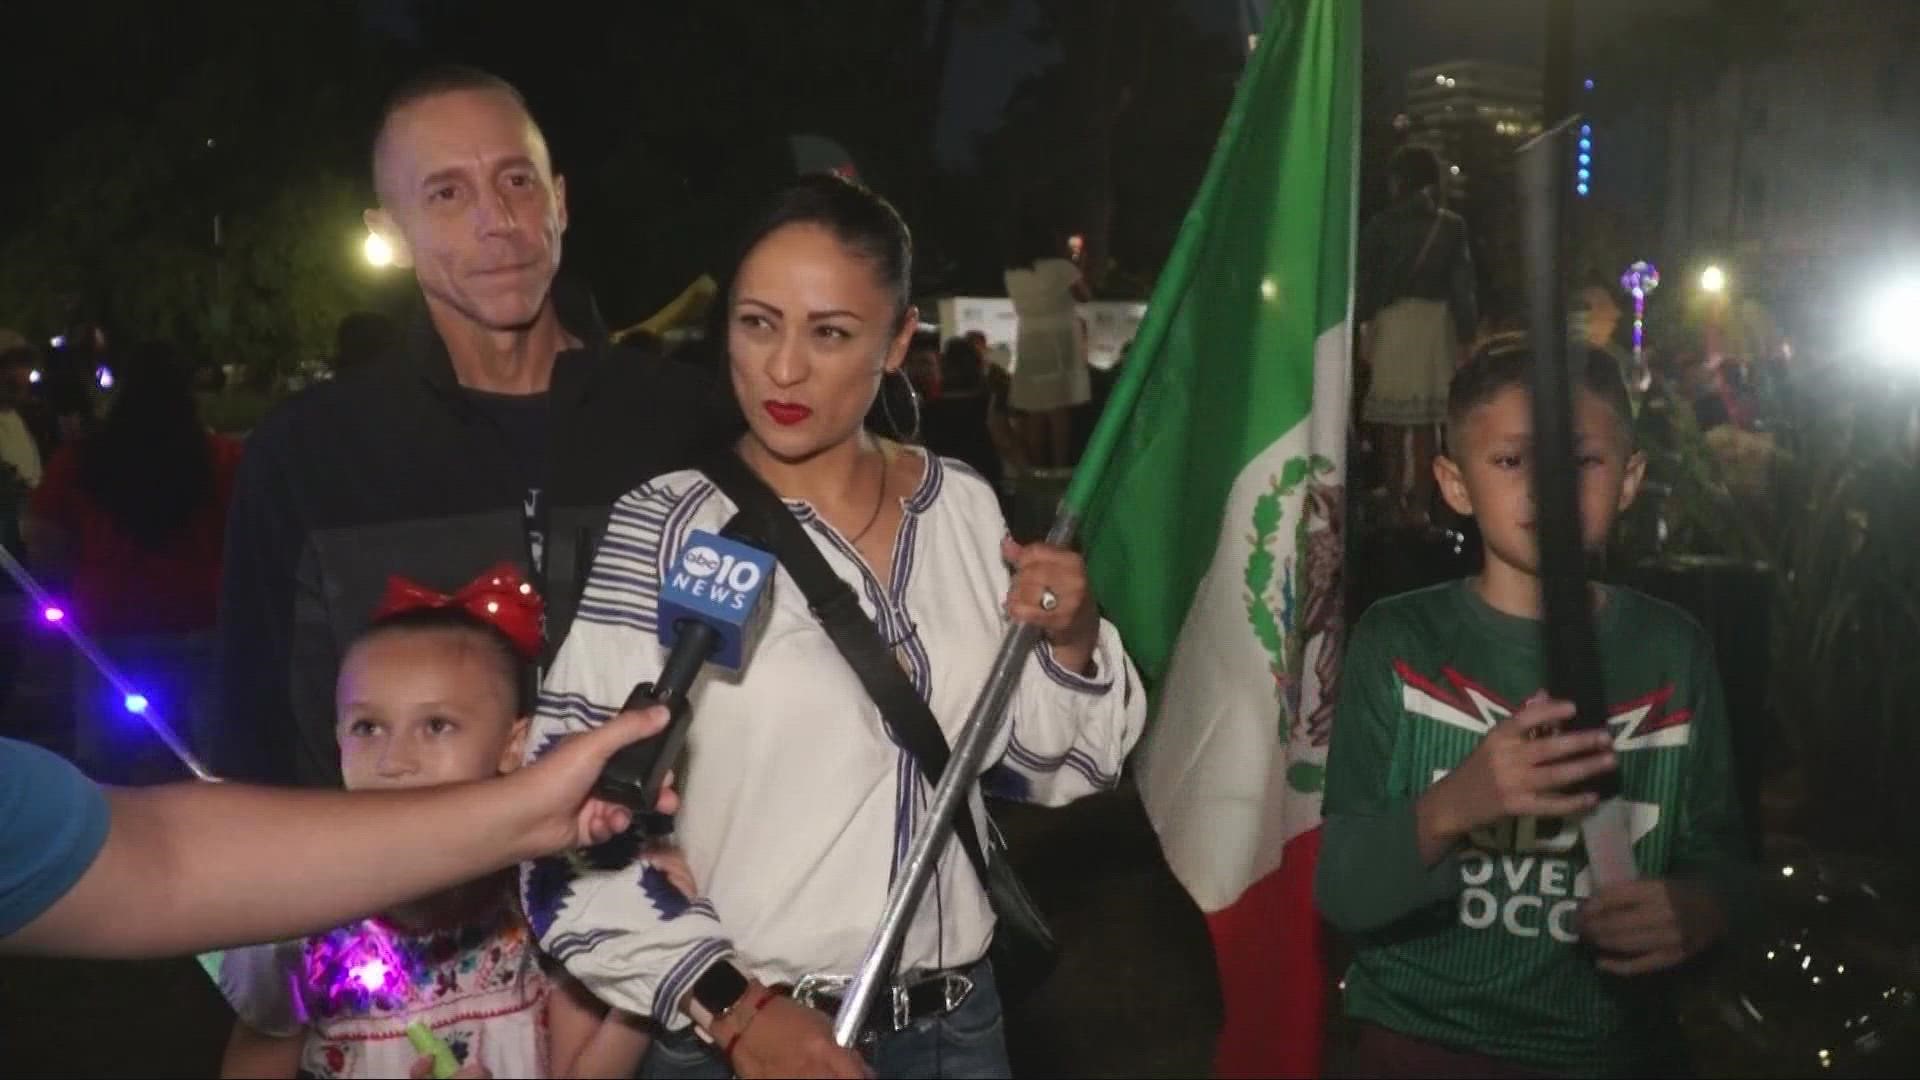 Mexican Independence Day in Sacramento was all about celebrating the culture.